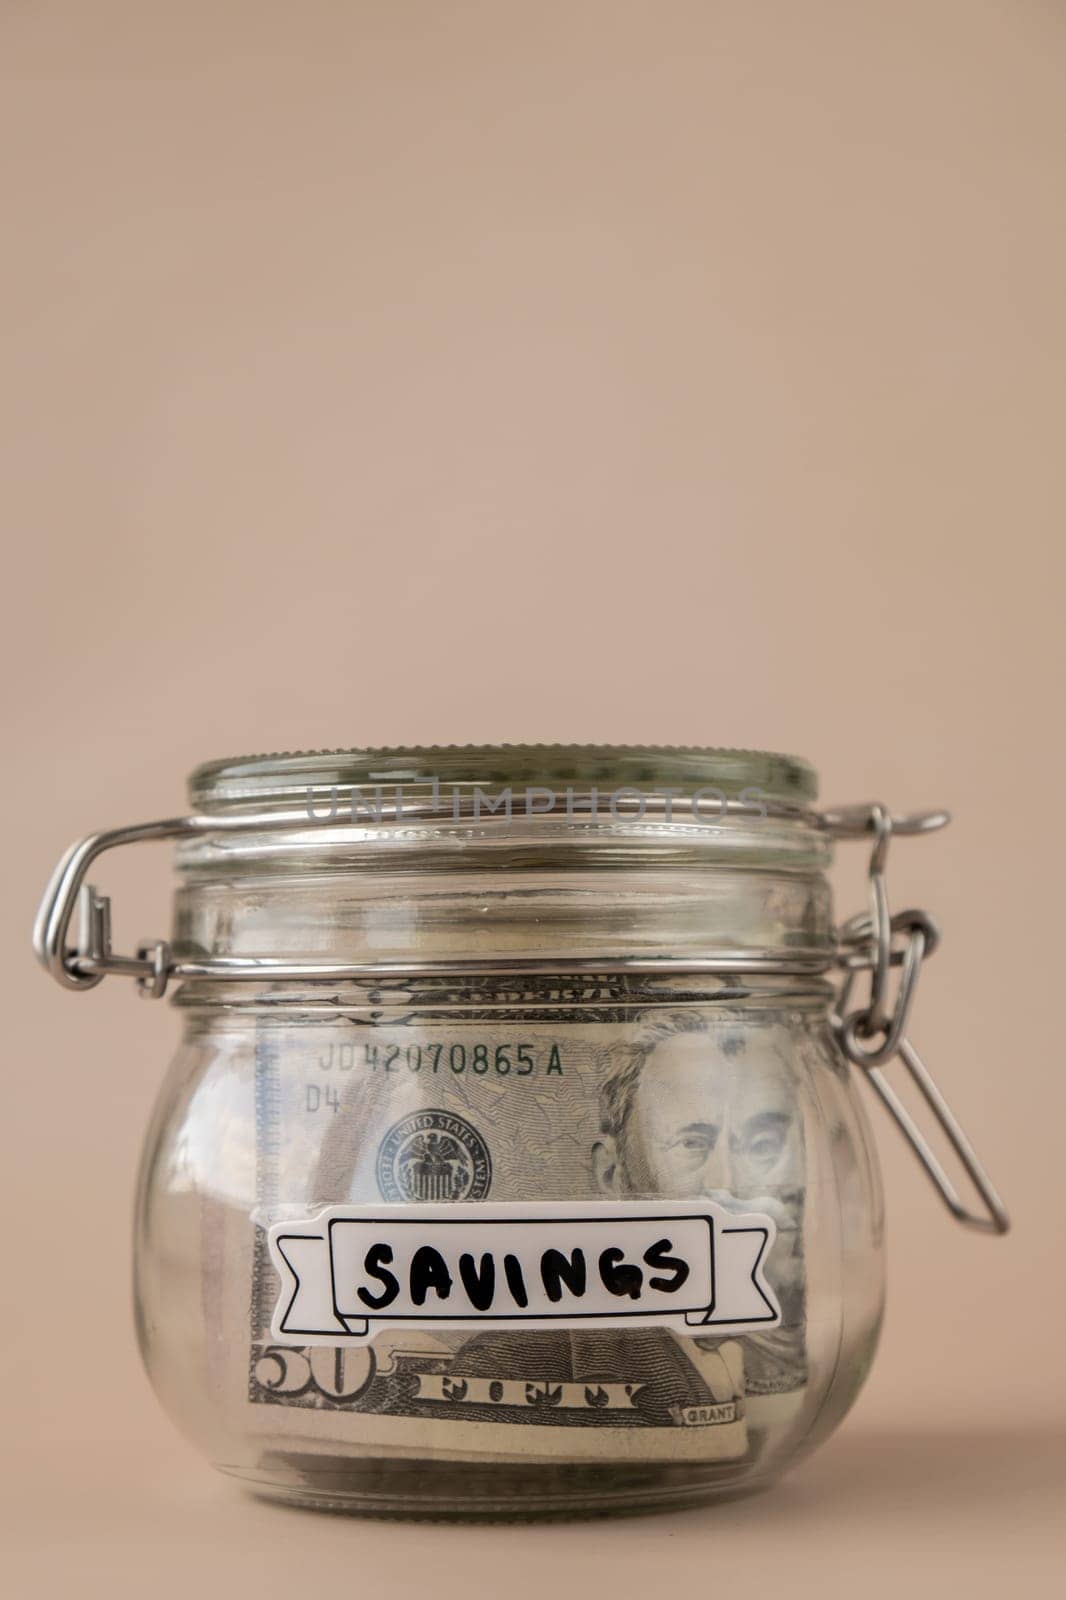 Saving Money In Glass Jar filled with Dollars banknotes. SAVINGS transcription in front of jar. Managing personal finances extra income for future insecurity. Beige background